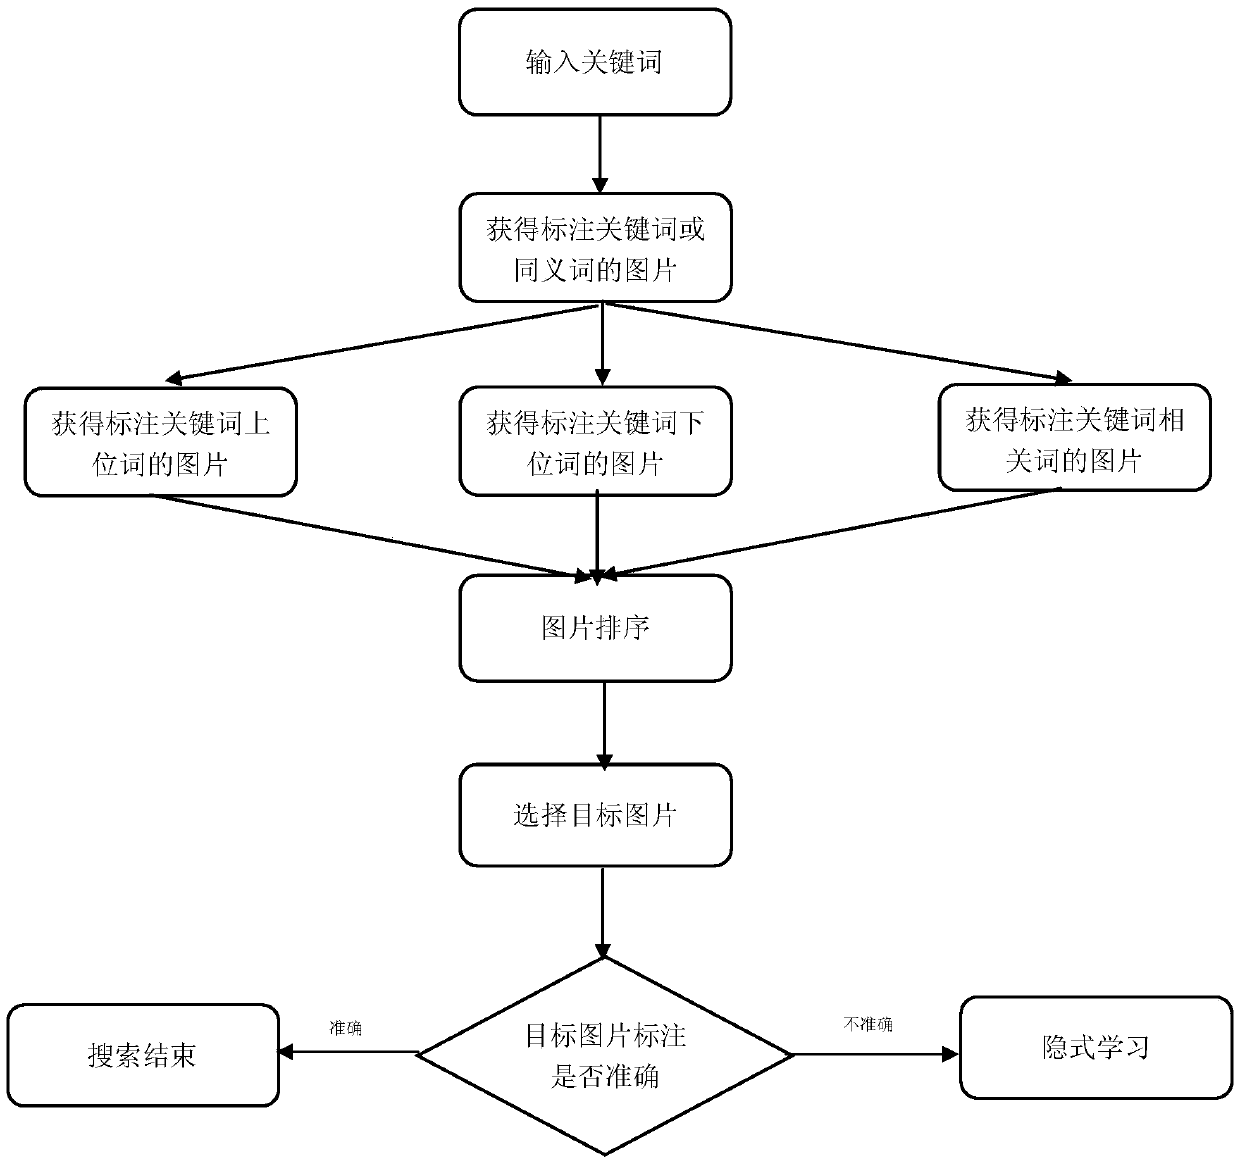 A picture operation method based on a knowledge graph